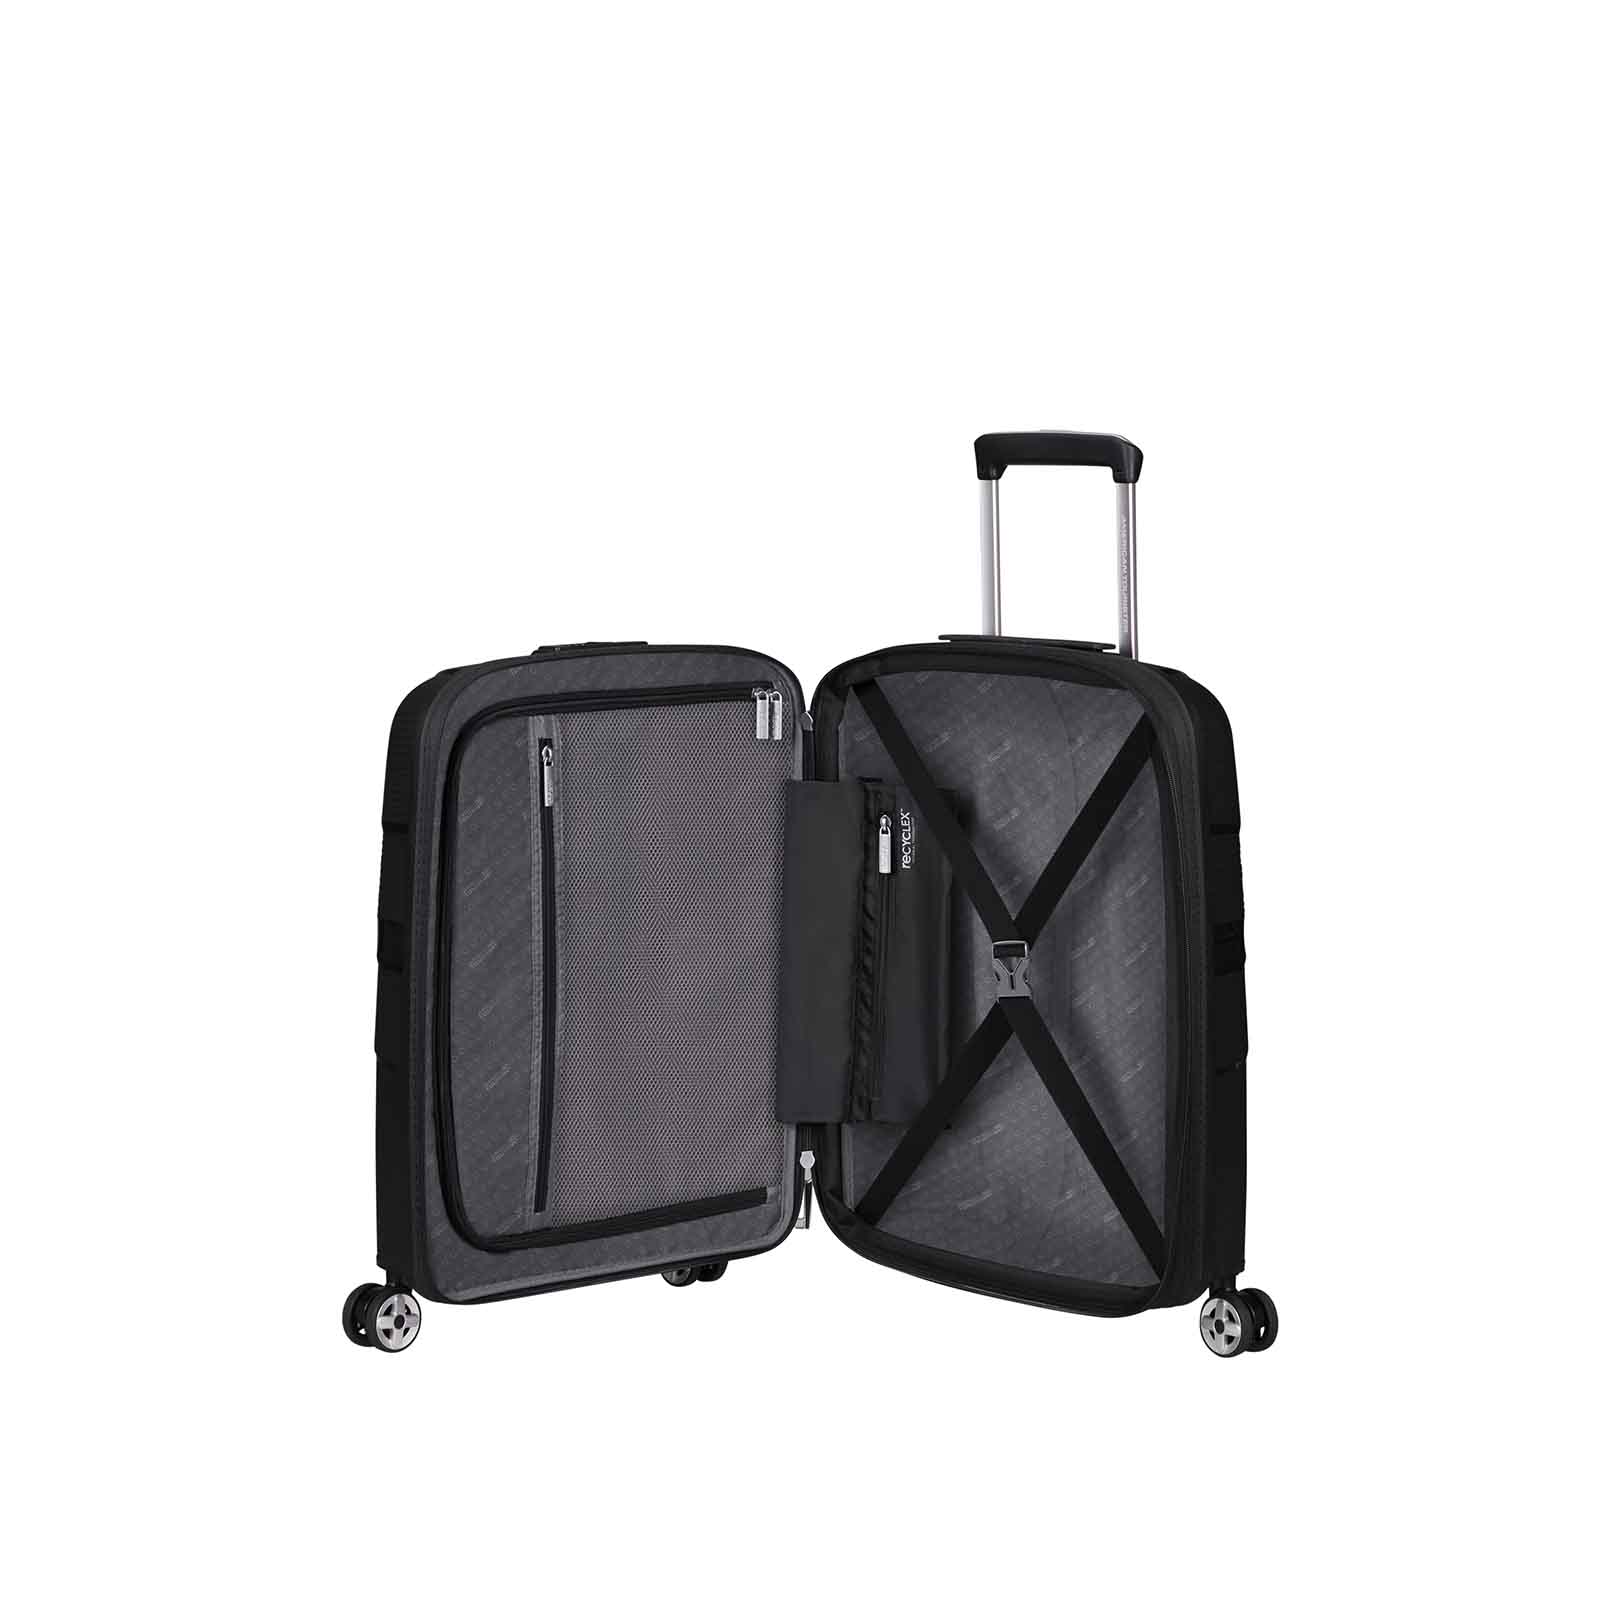 American-Tourister-Starvibe-55cm-Carry-On-Suitcase-Black-Open